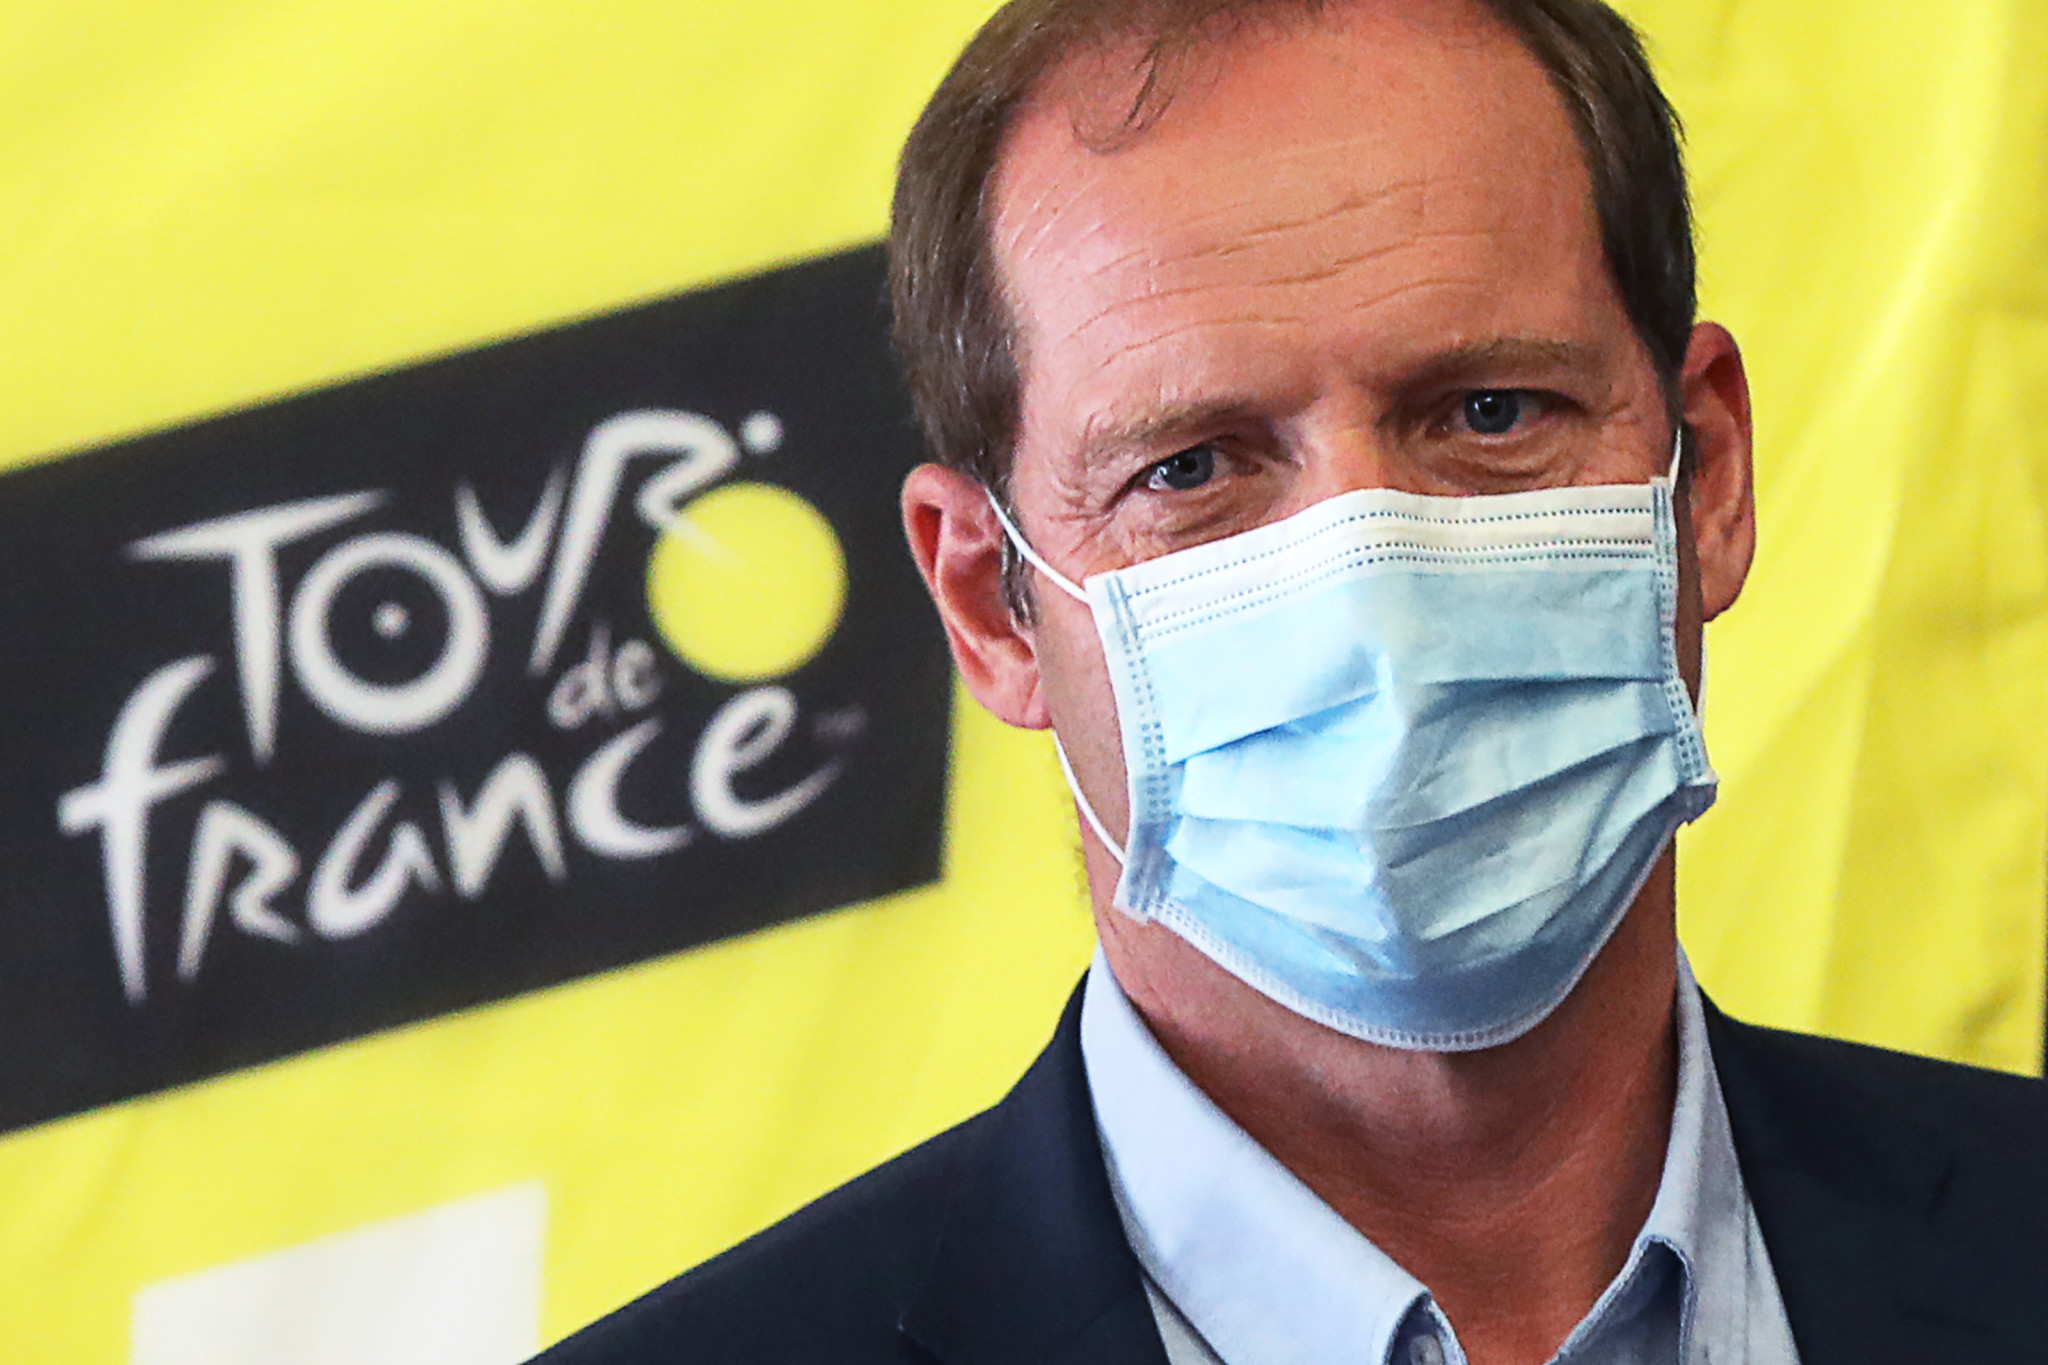 Christian Prudhomme has tested positive for coronavirus ©Getty Images